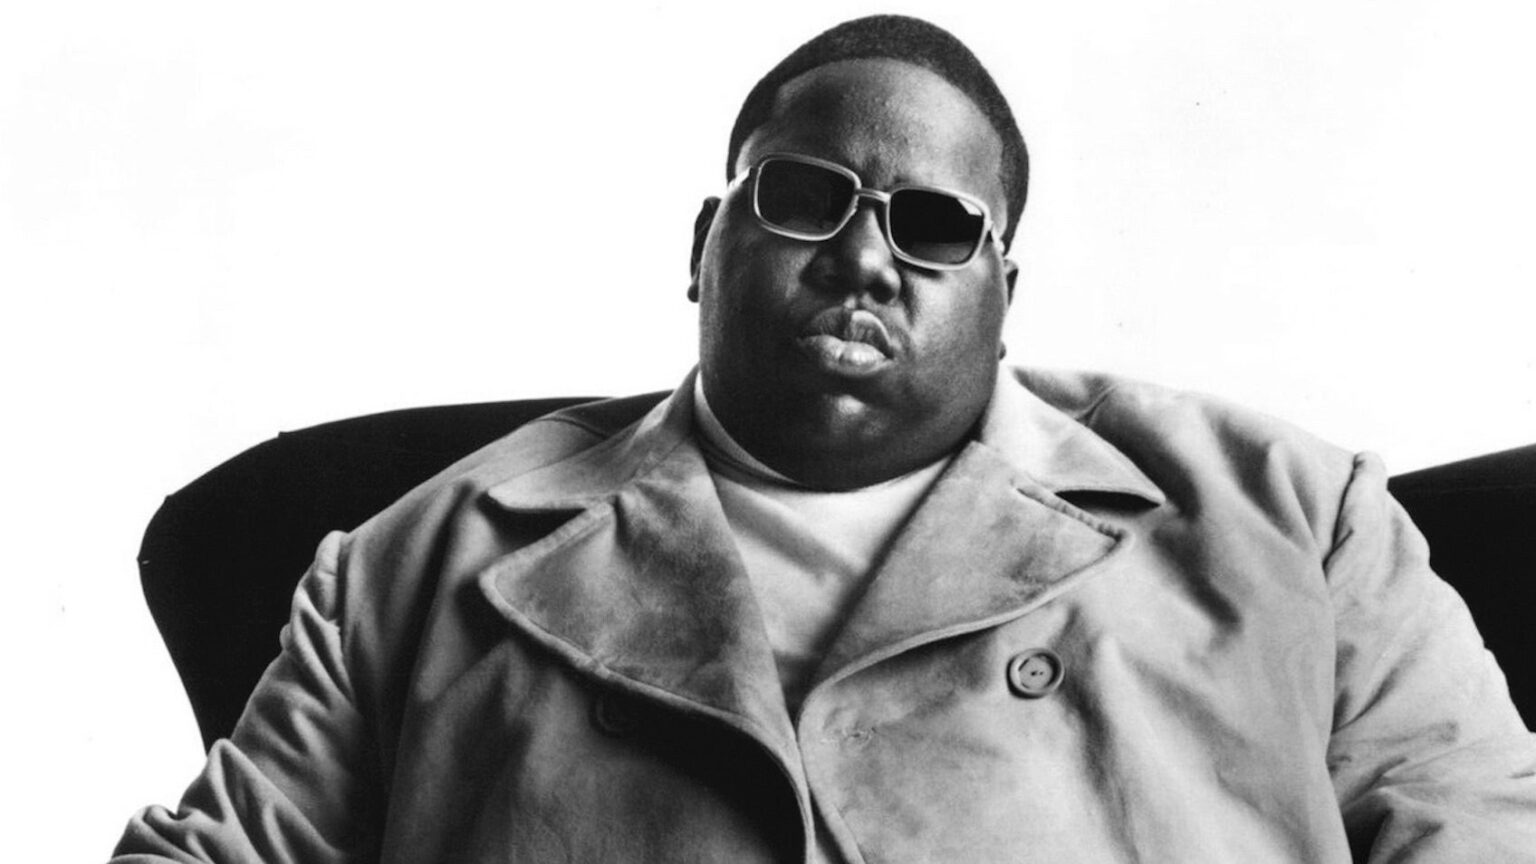 Has the mysterious murder of the Notorious BIG been solved? Delve into unsealed evidence that filmmakers and investigators unearthed and what it could mean.